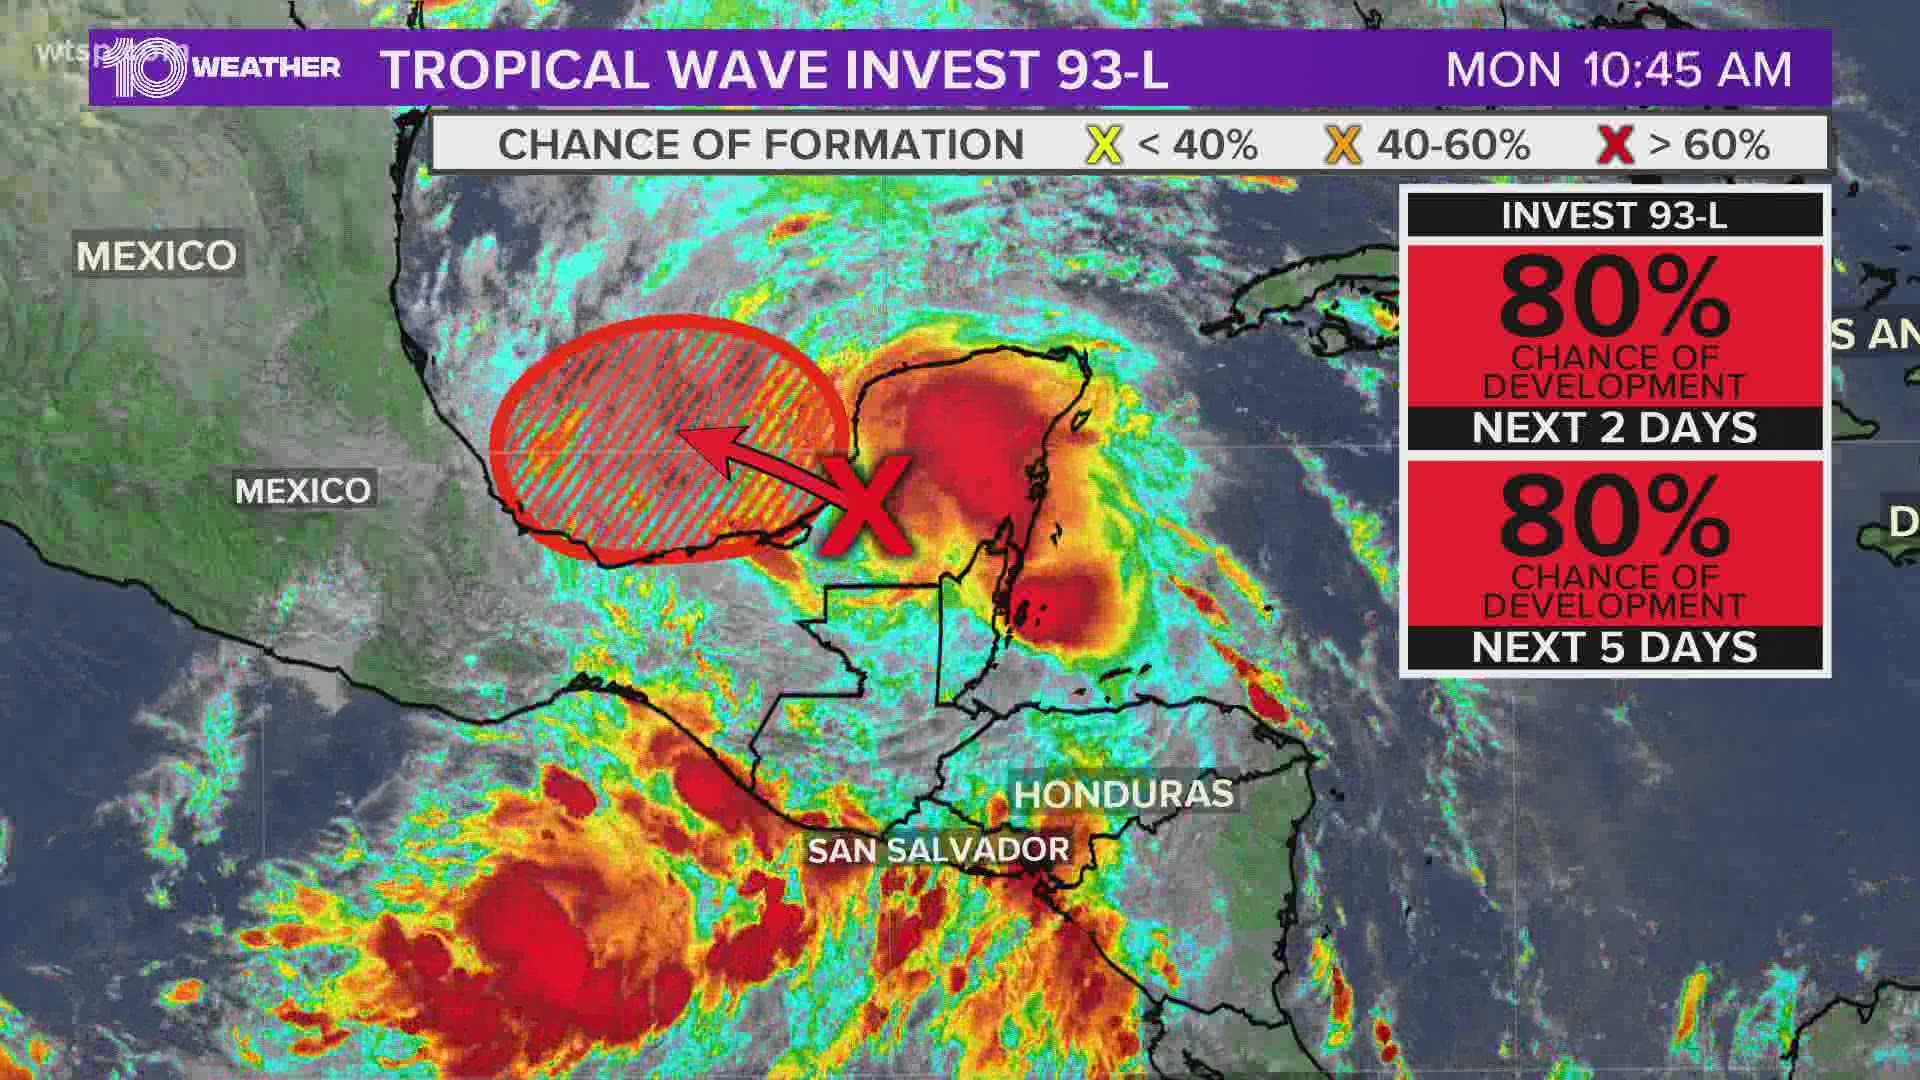 Hurricane season officially starts June 1, but we've already seen two named tropical storms, and a third named storm could form in the coming days.